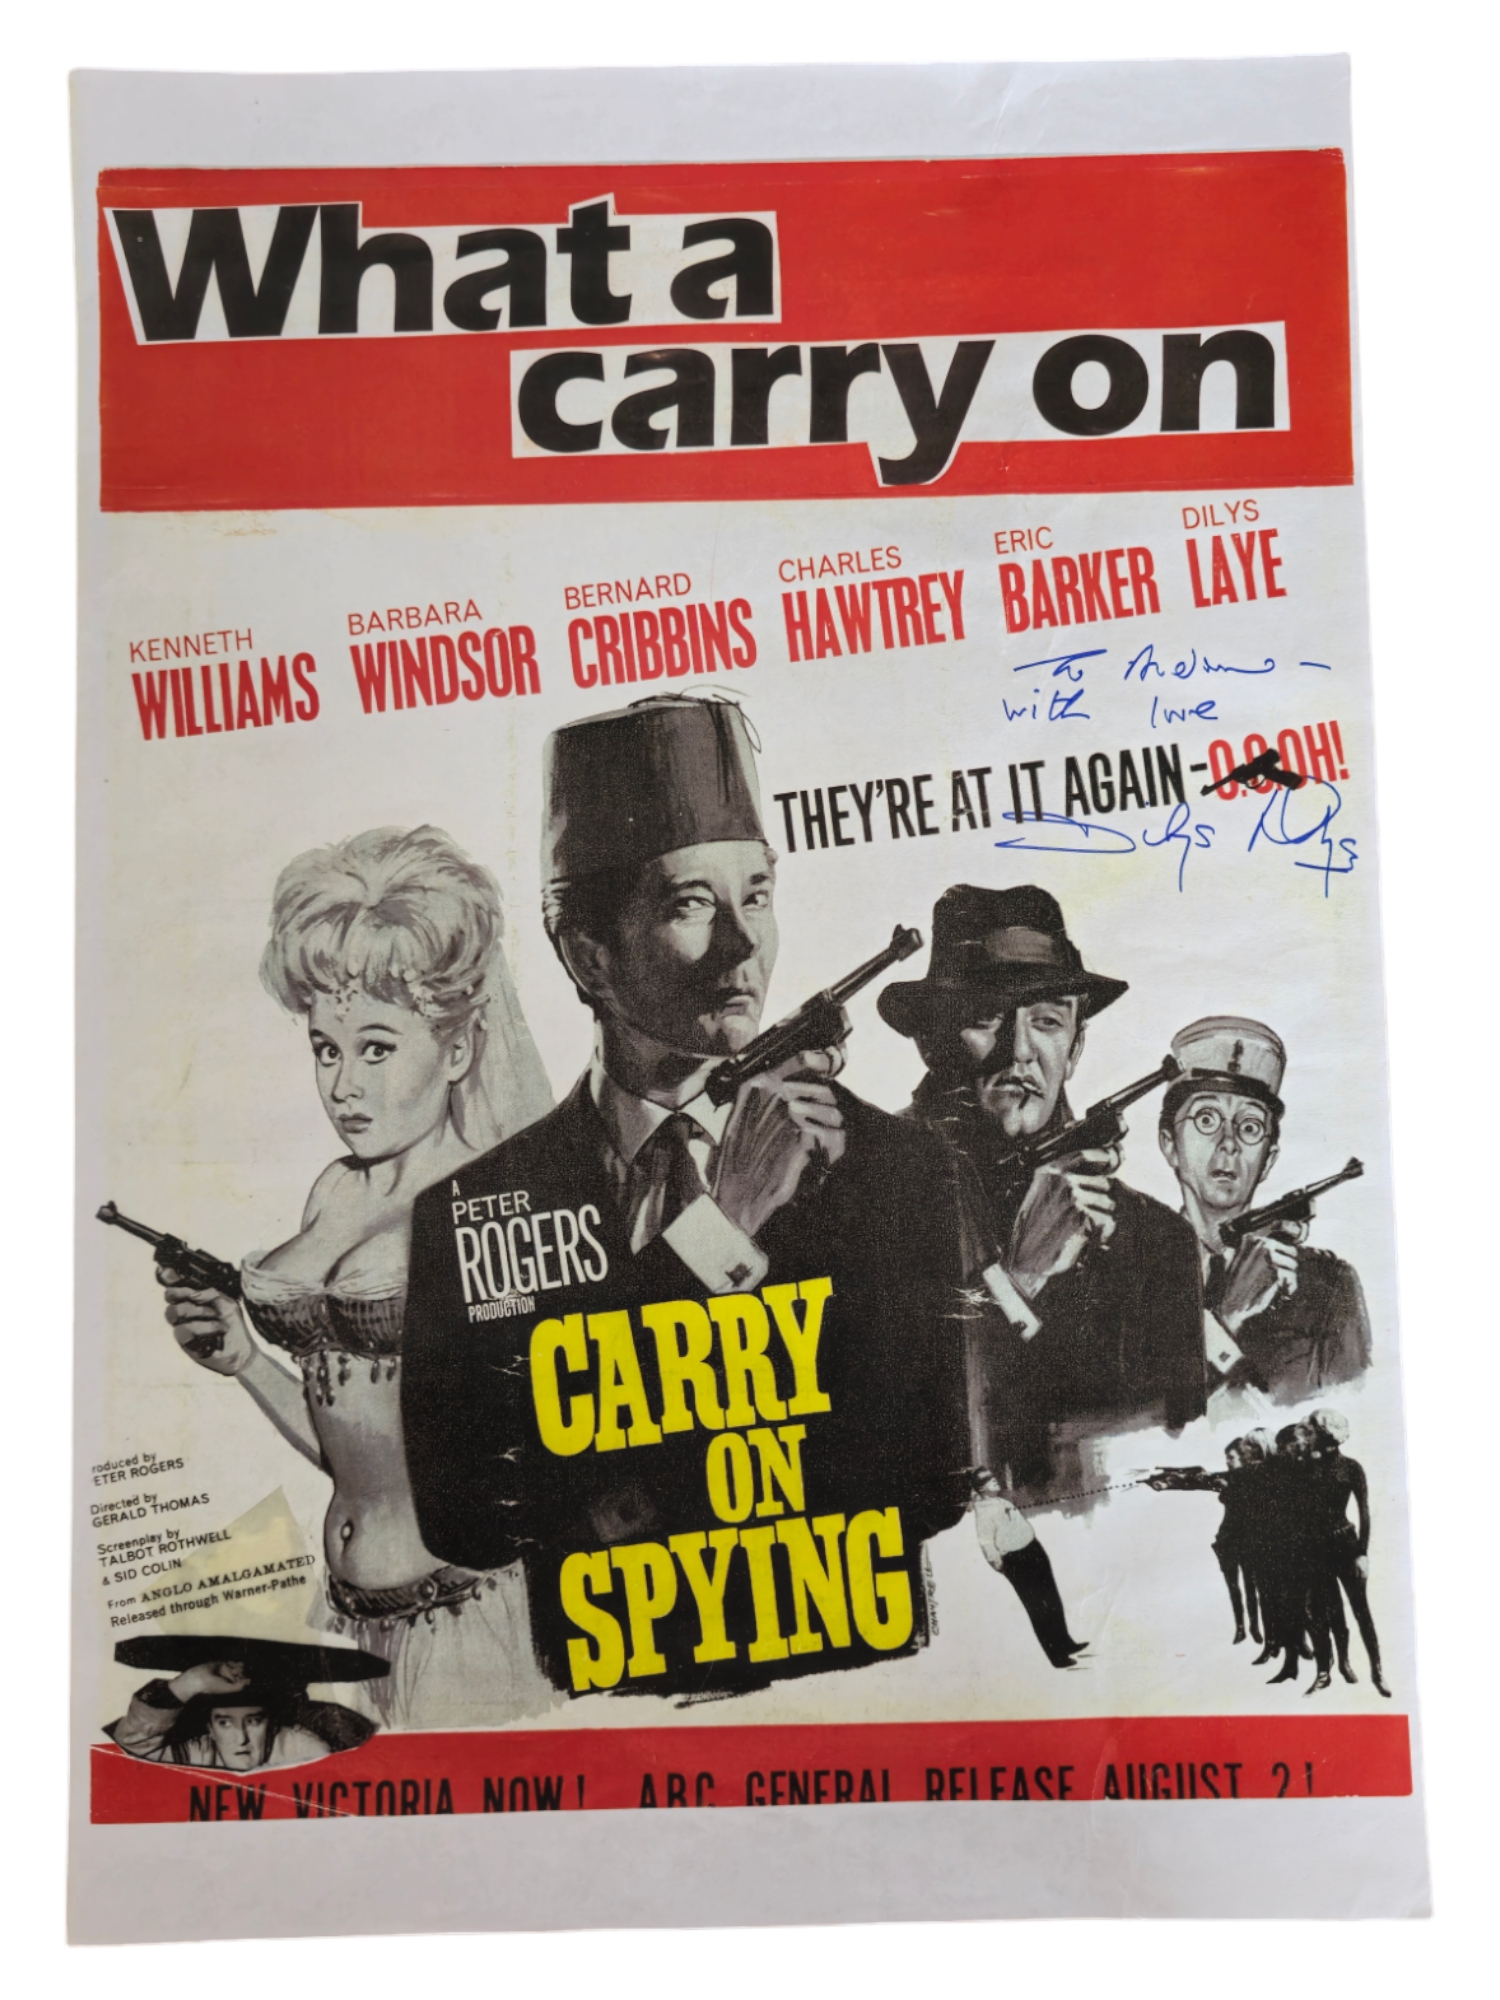 Dilys Laye signed Carry on Spying poster photo 16.5 x12 inch approx. Good condition Est.